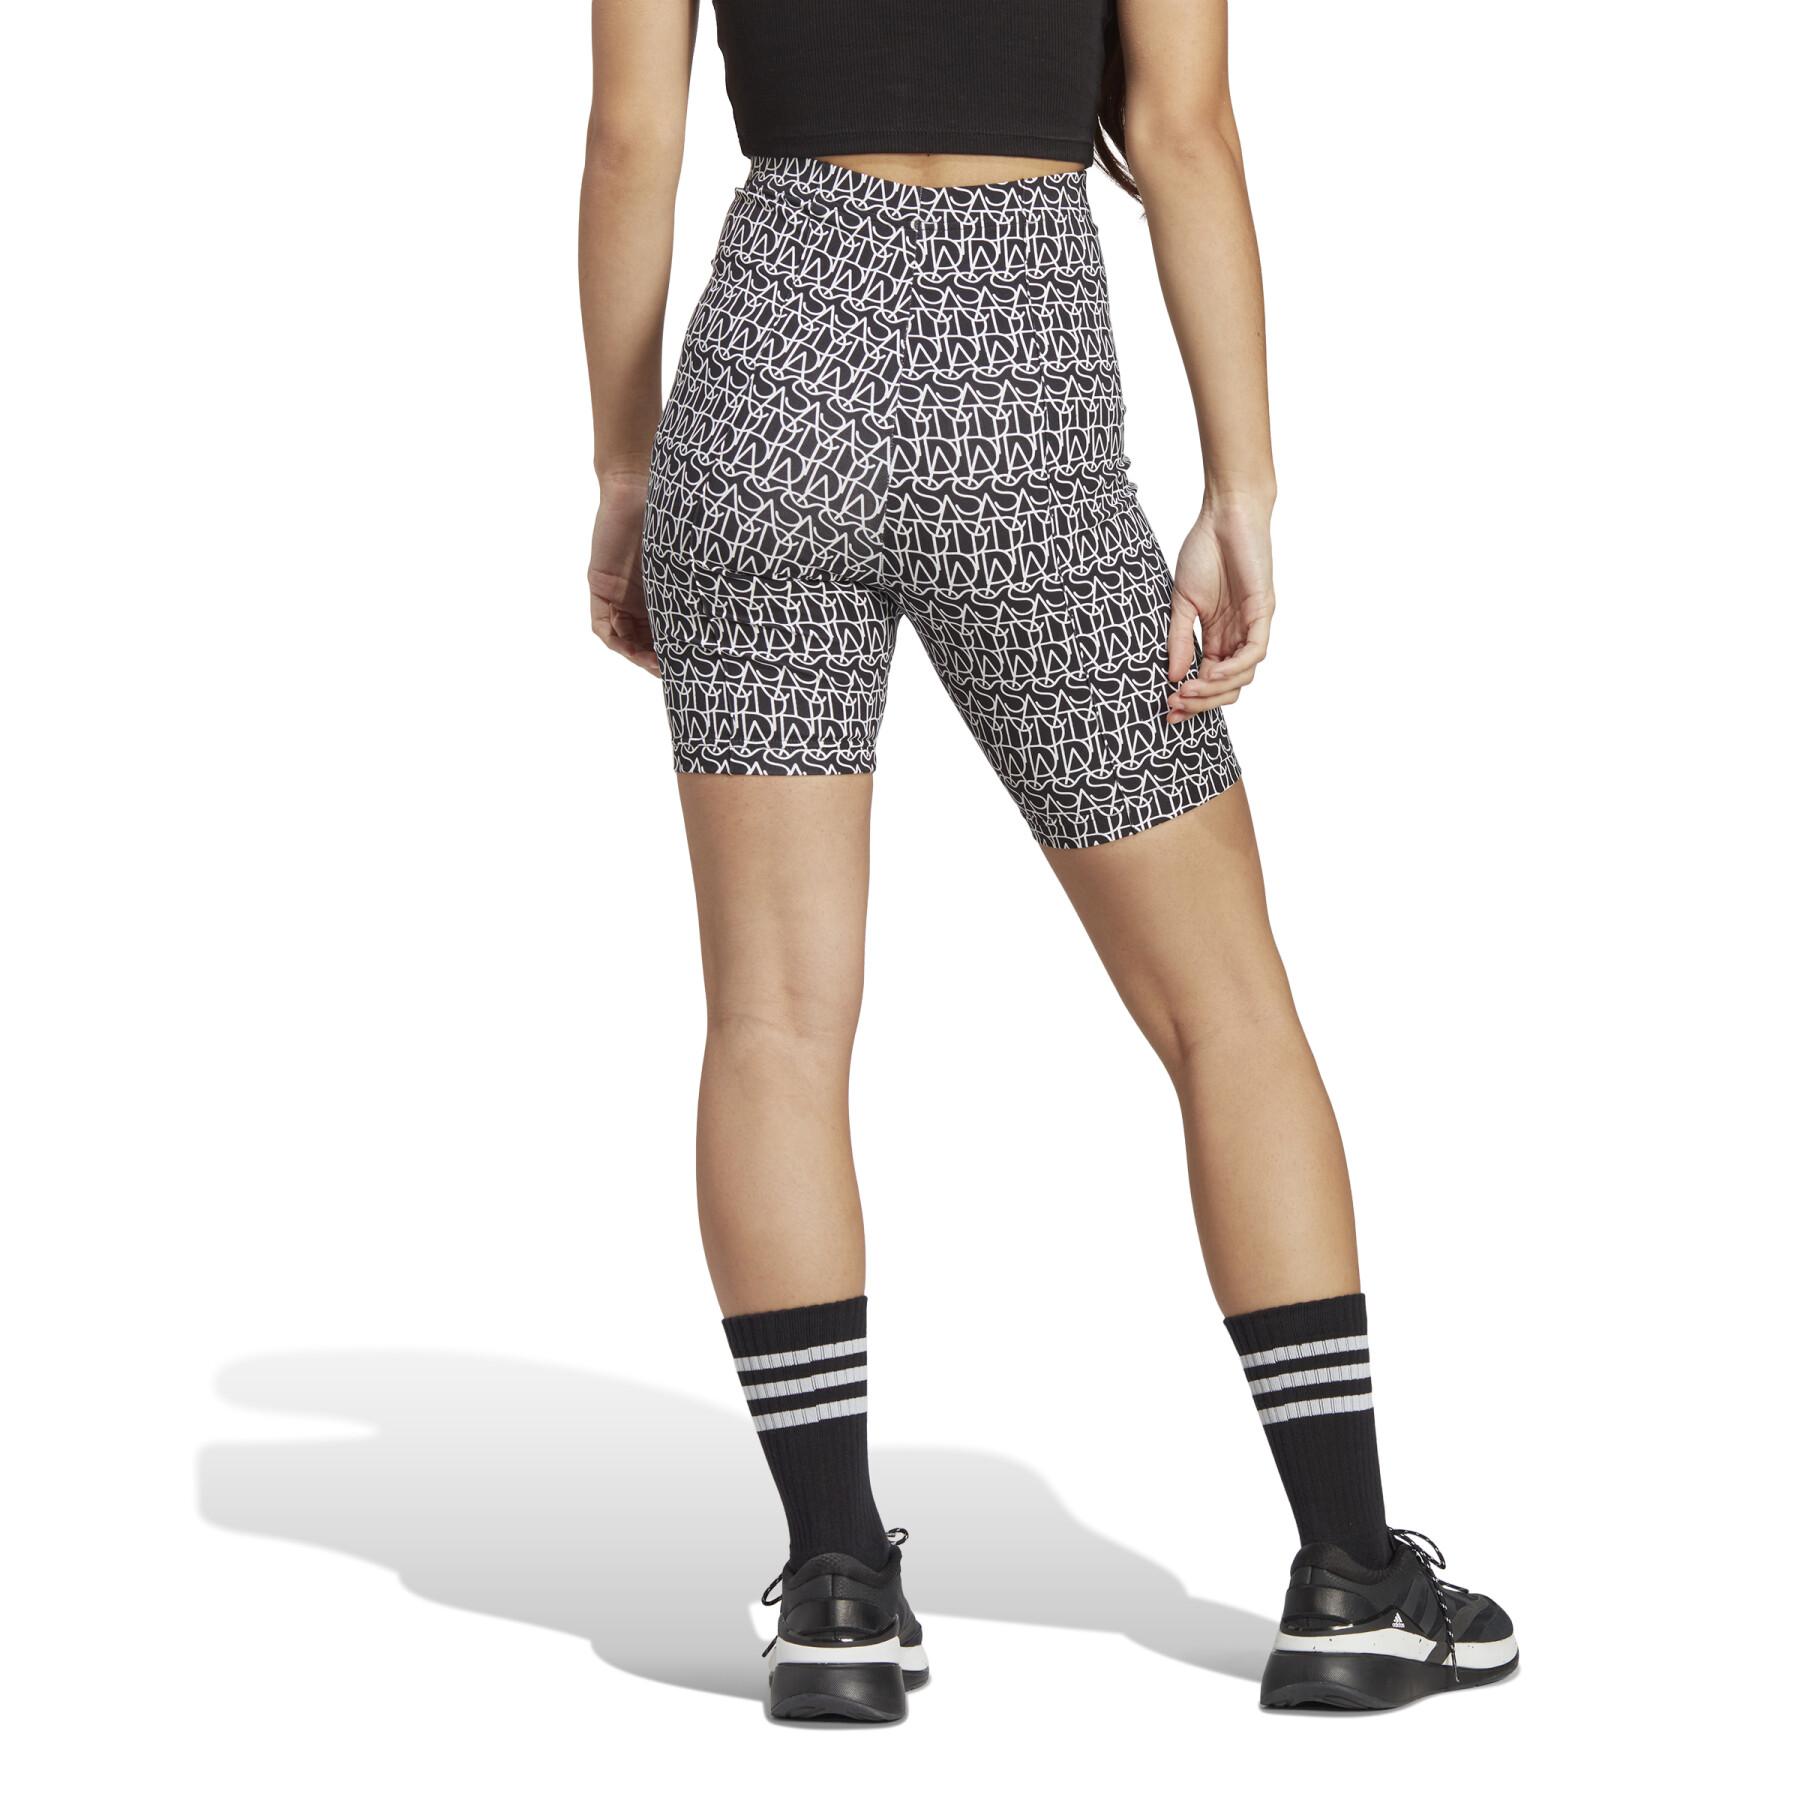 Cuissard femme adidas Allover Graphic